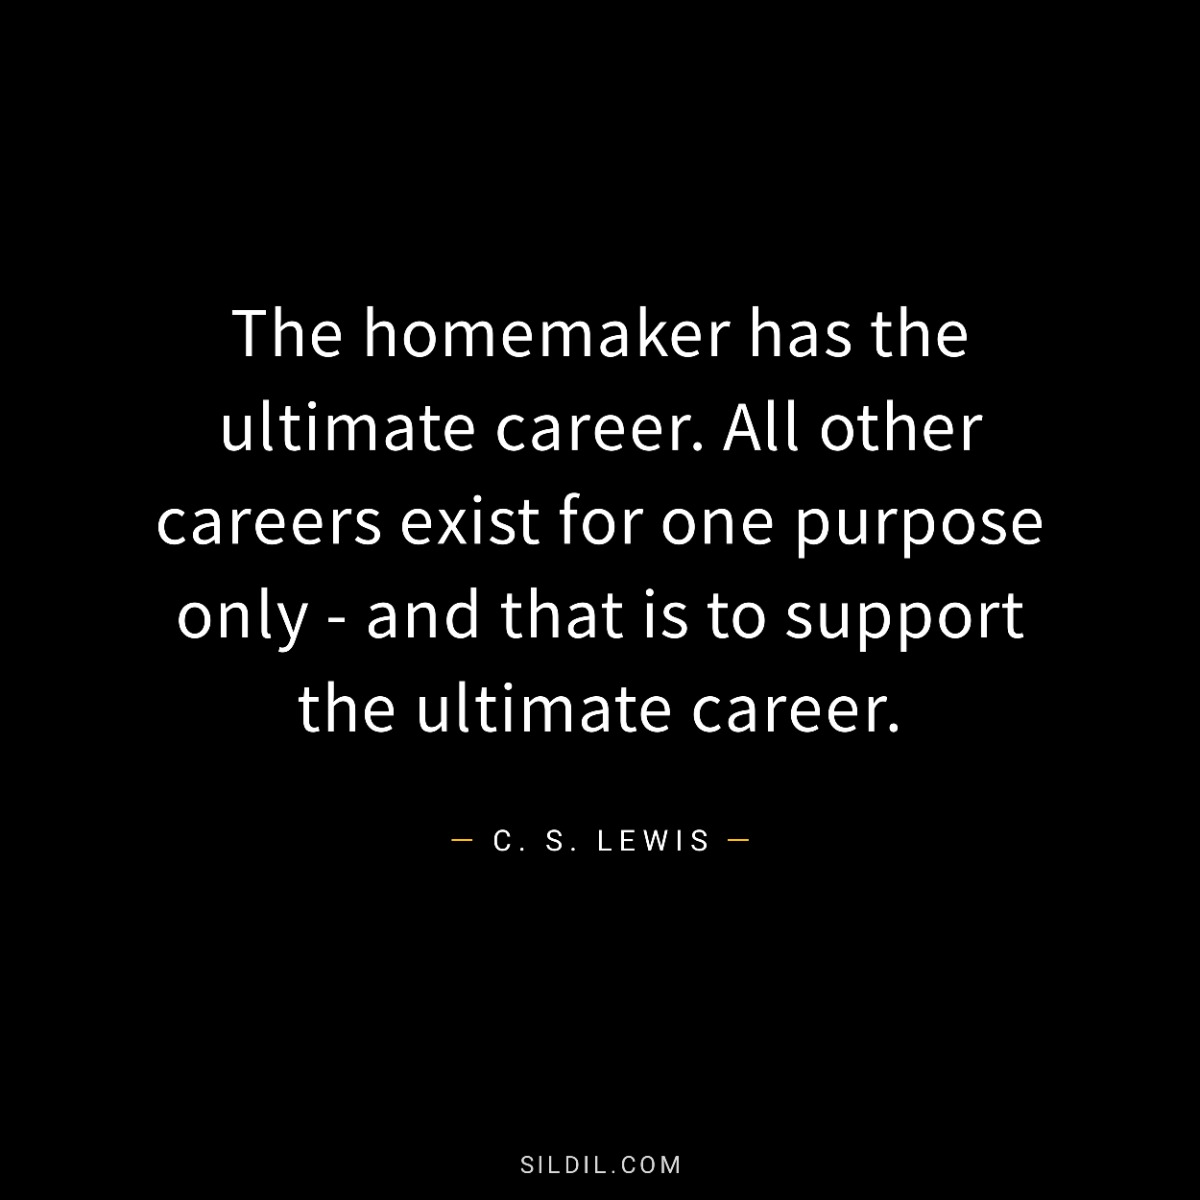 The homemaker has the ultimate career. All other careers exist for one purpose only - and that is to support the ultimate career.